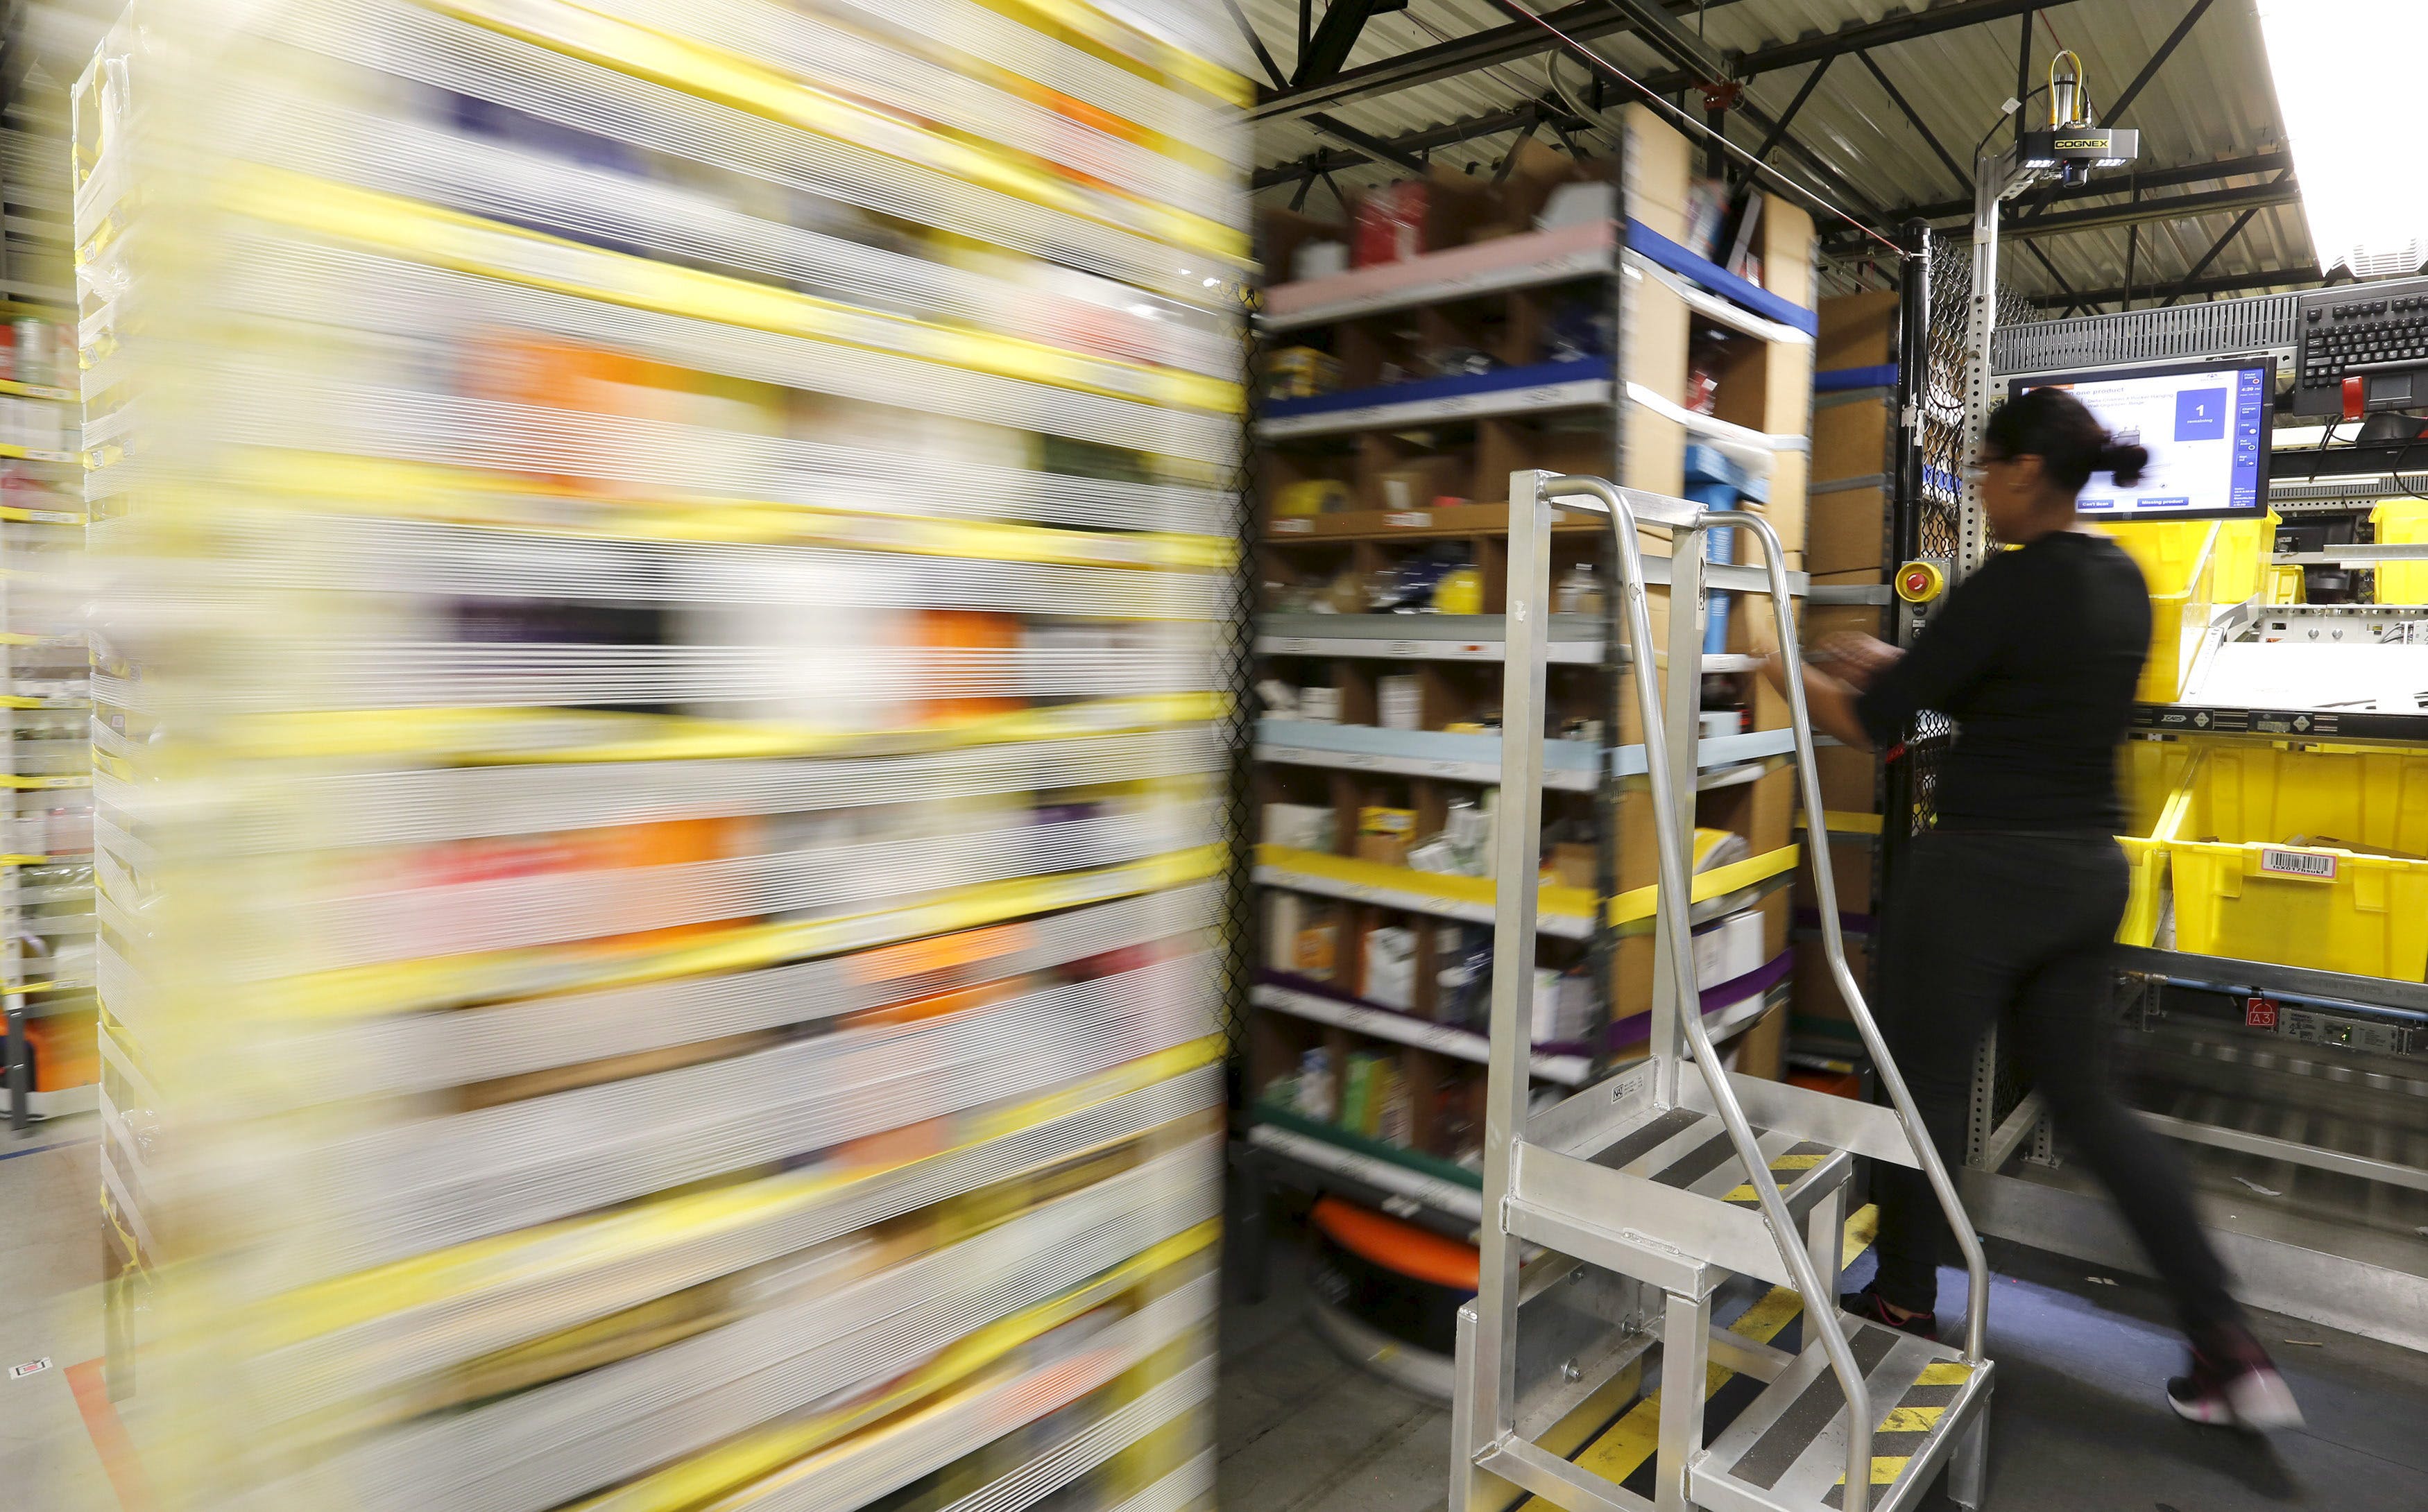 Marvilla pulls items out of robotic bins before they zip away at the Amazon Fulfillment Center in Tracy